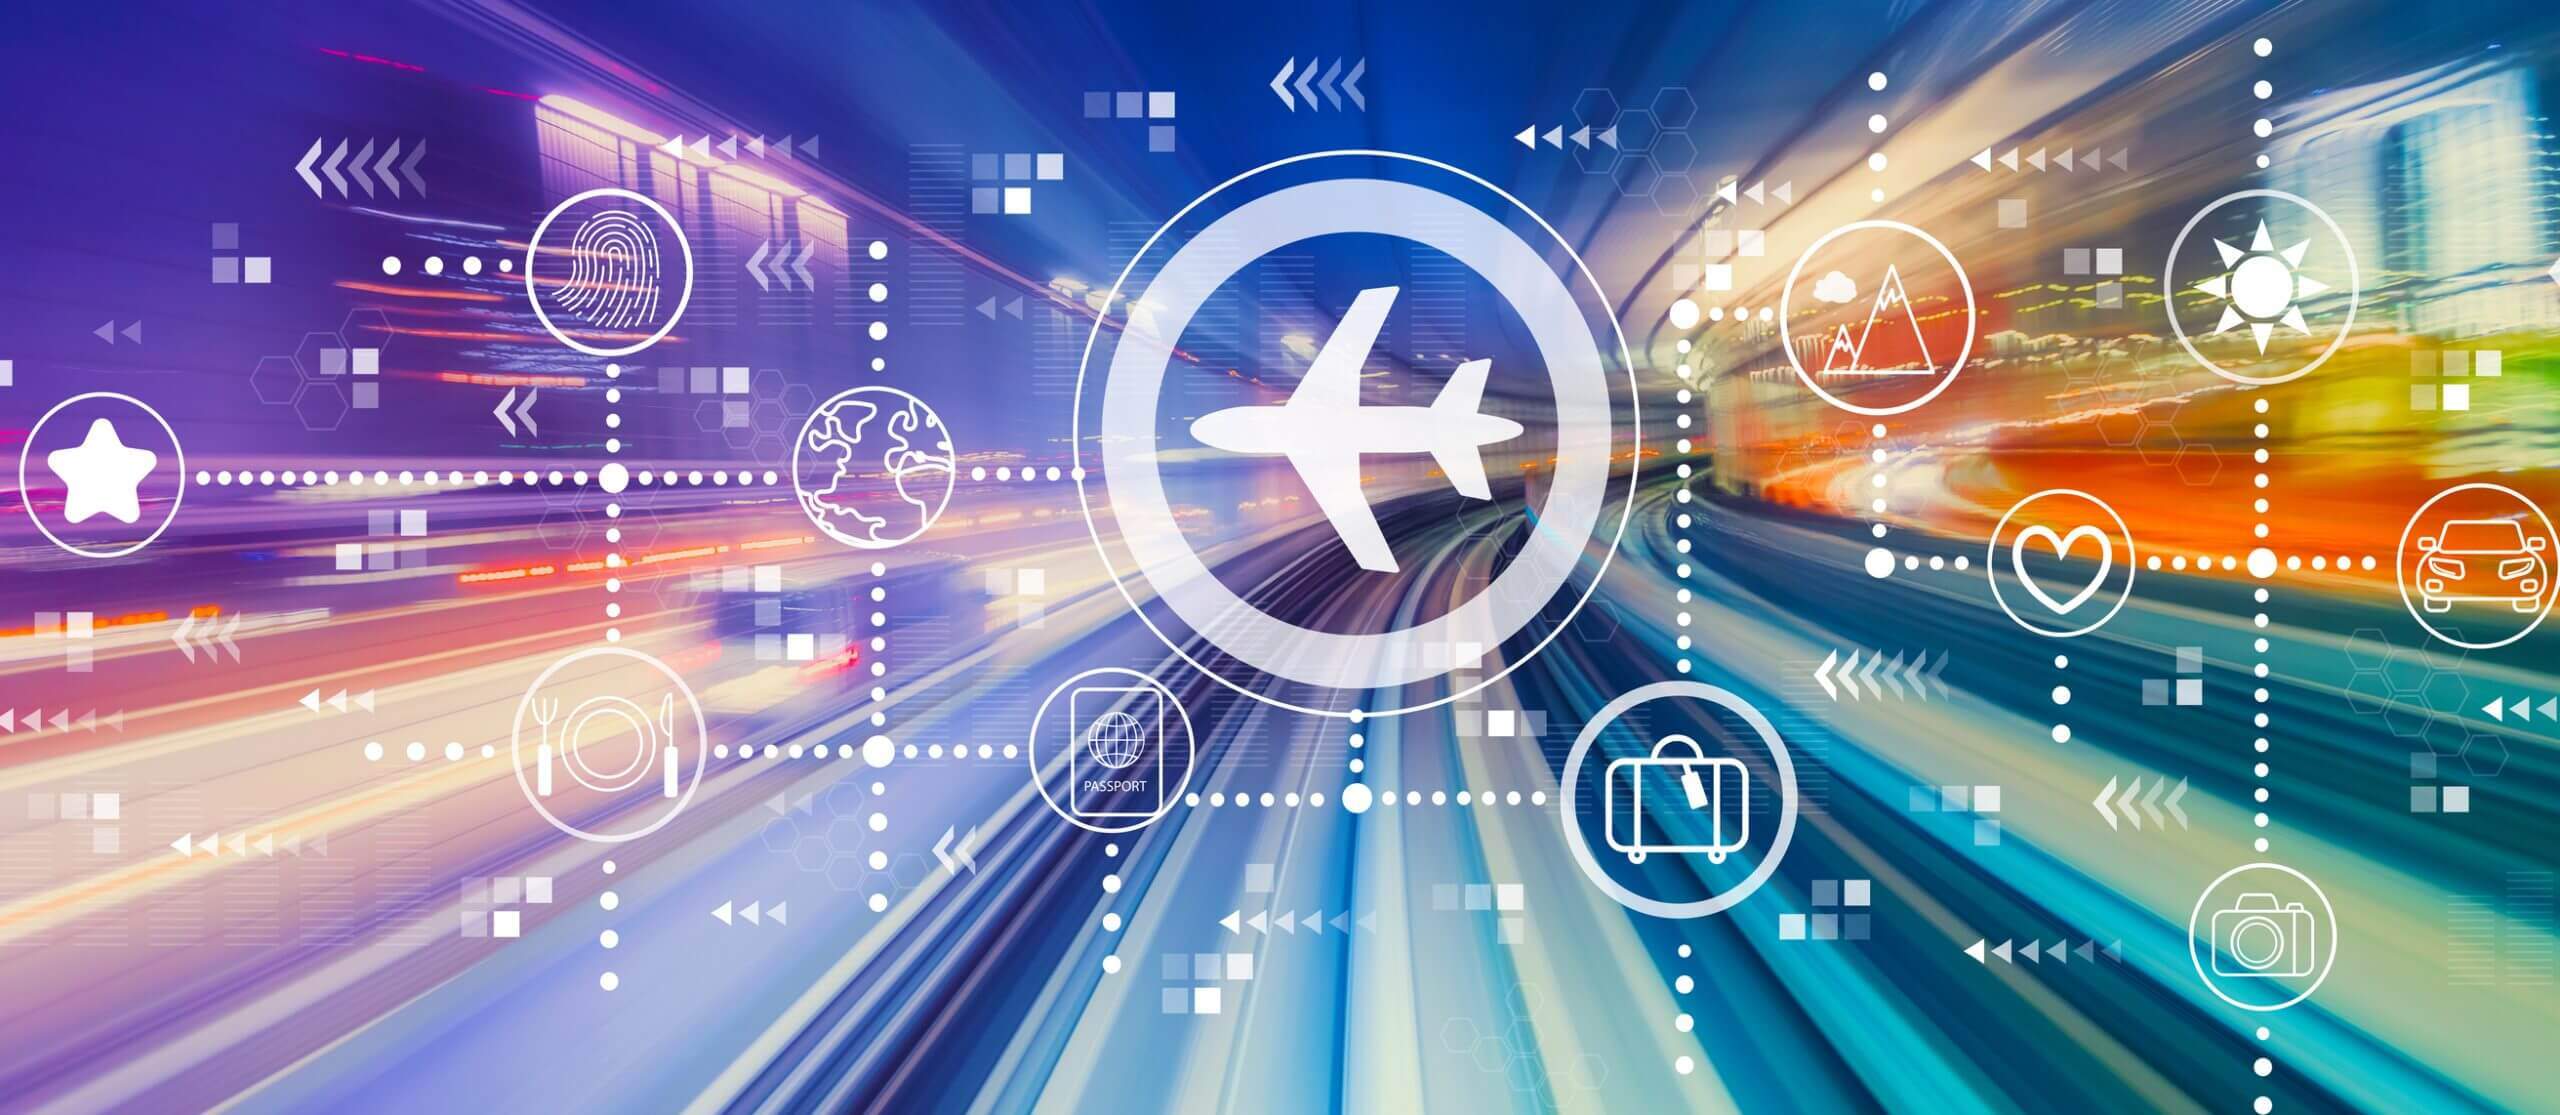 4 Top Emerging Airline Technology Trends for the Aviation Industry in